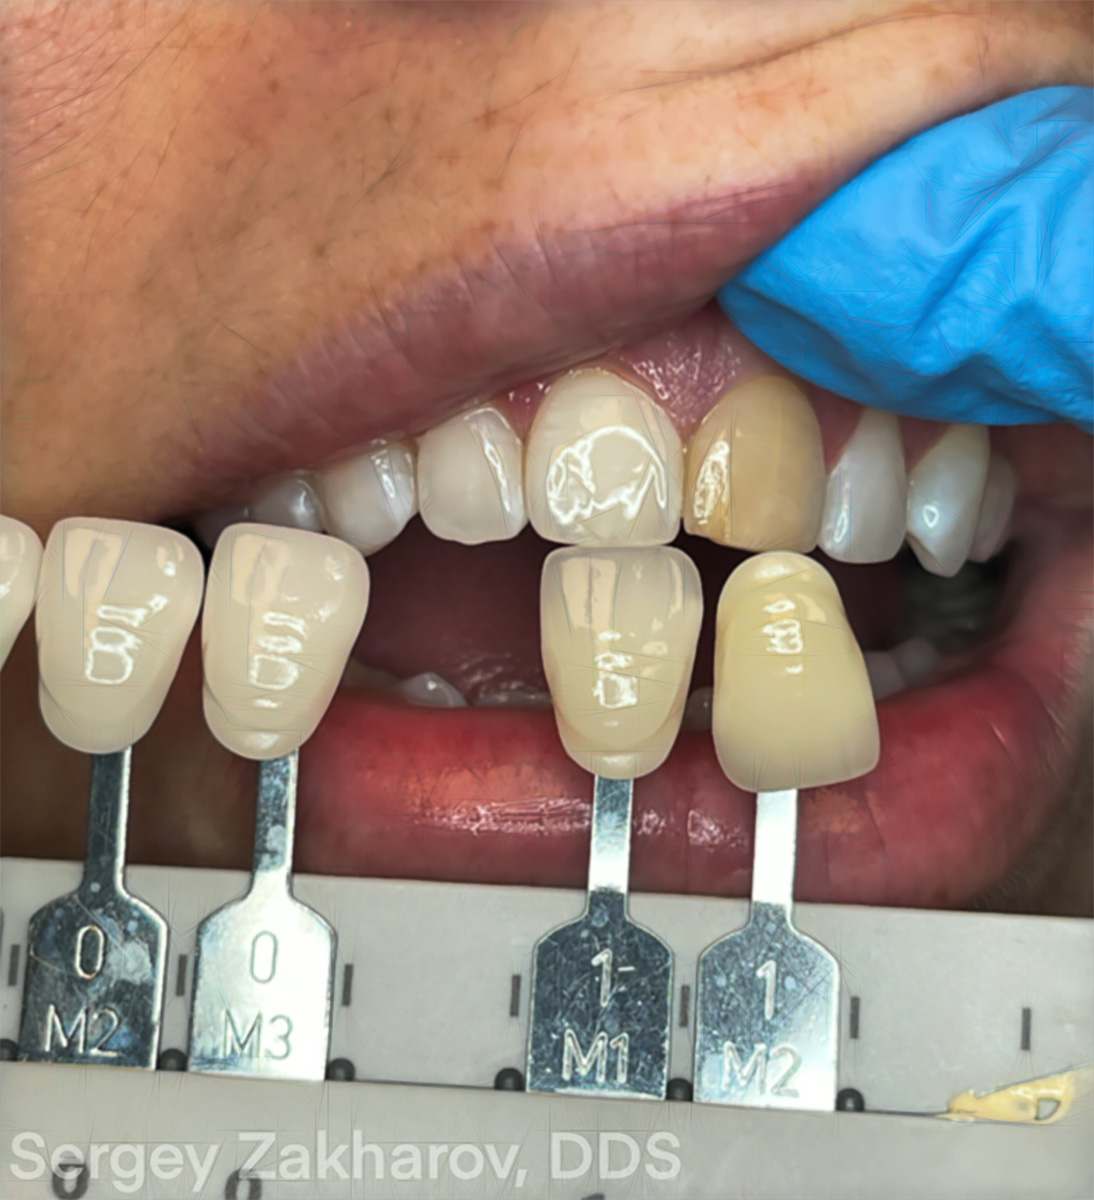 Matching A Central Incisor - Maxillary Central Incisor - Burbank Dental Lab - Los Angeles